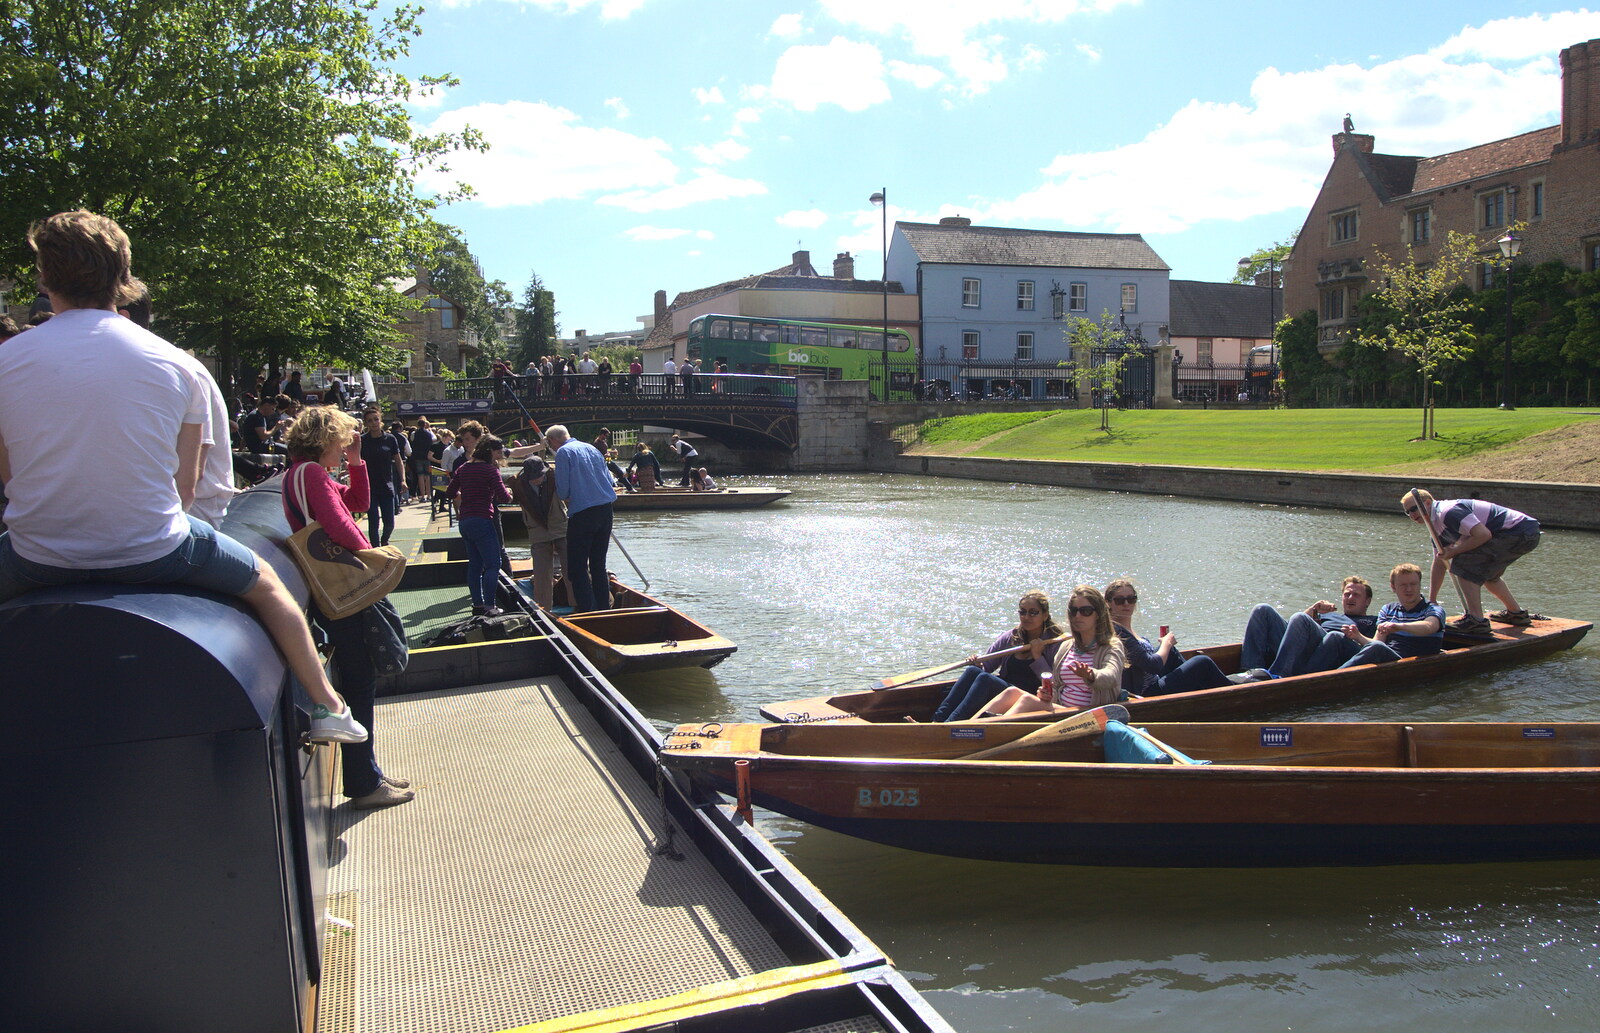 It's heaving down at Scudamore's punts from Punting With Grandad, Cambridge, Cambridgeshire - 6th June 2015